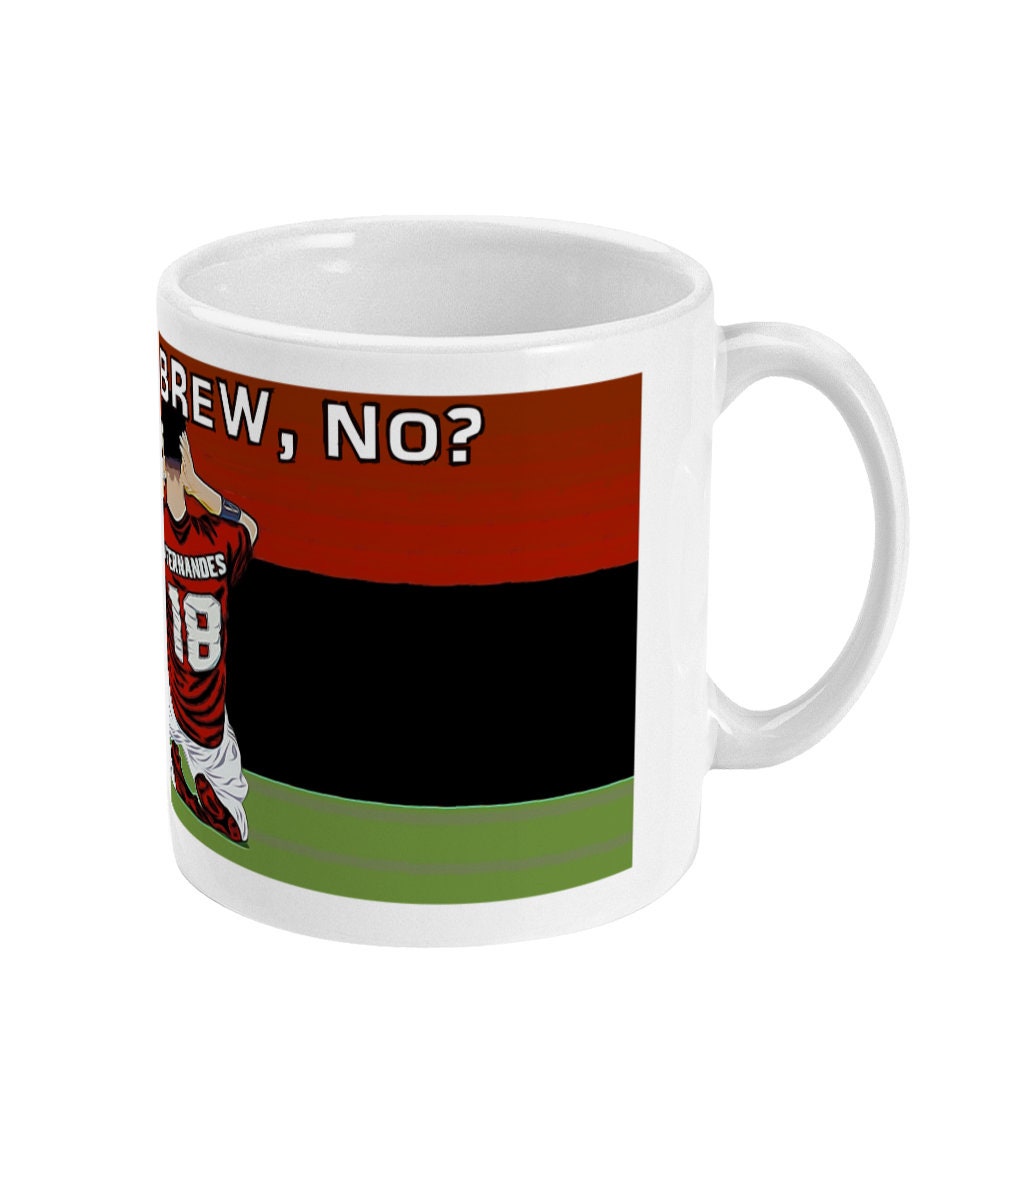 Fancy a Brew, no? - Sexy Bruno Fernandes mug - Variations available